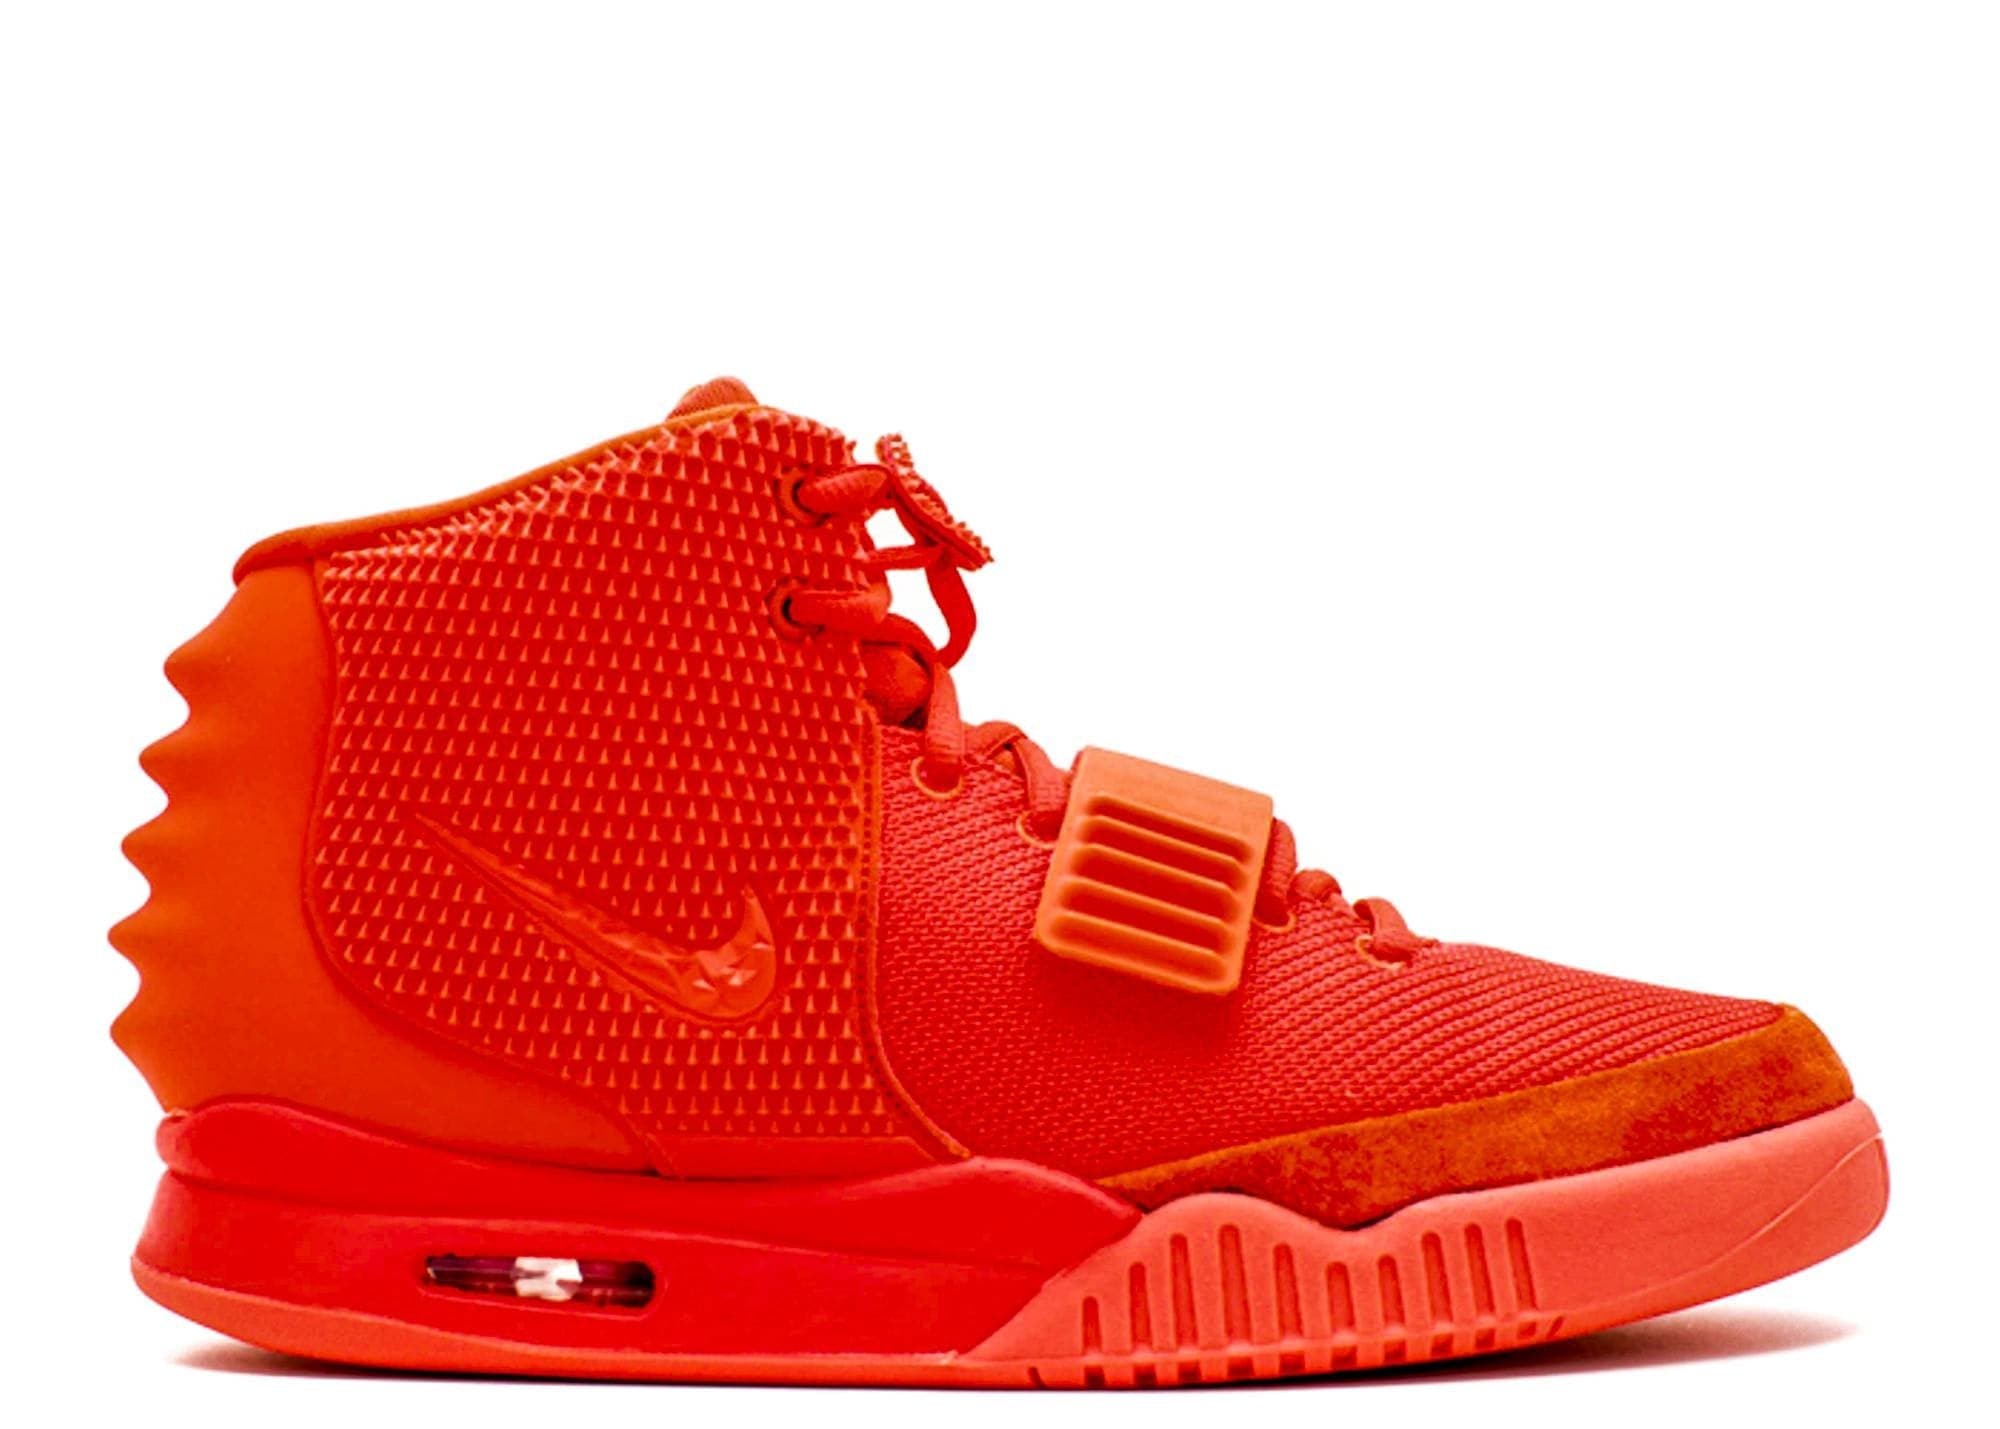 NIKE - YEEZY 2 RED OCTOBER (PRE-OWNED) - The Magnolia Park